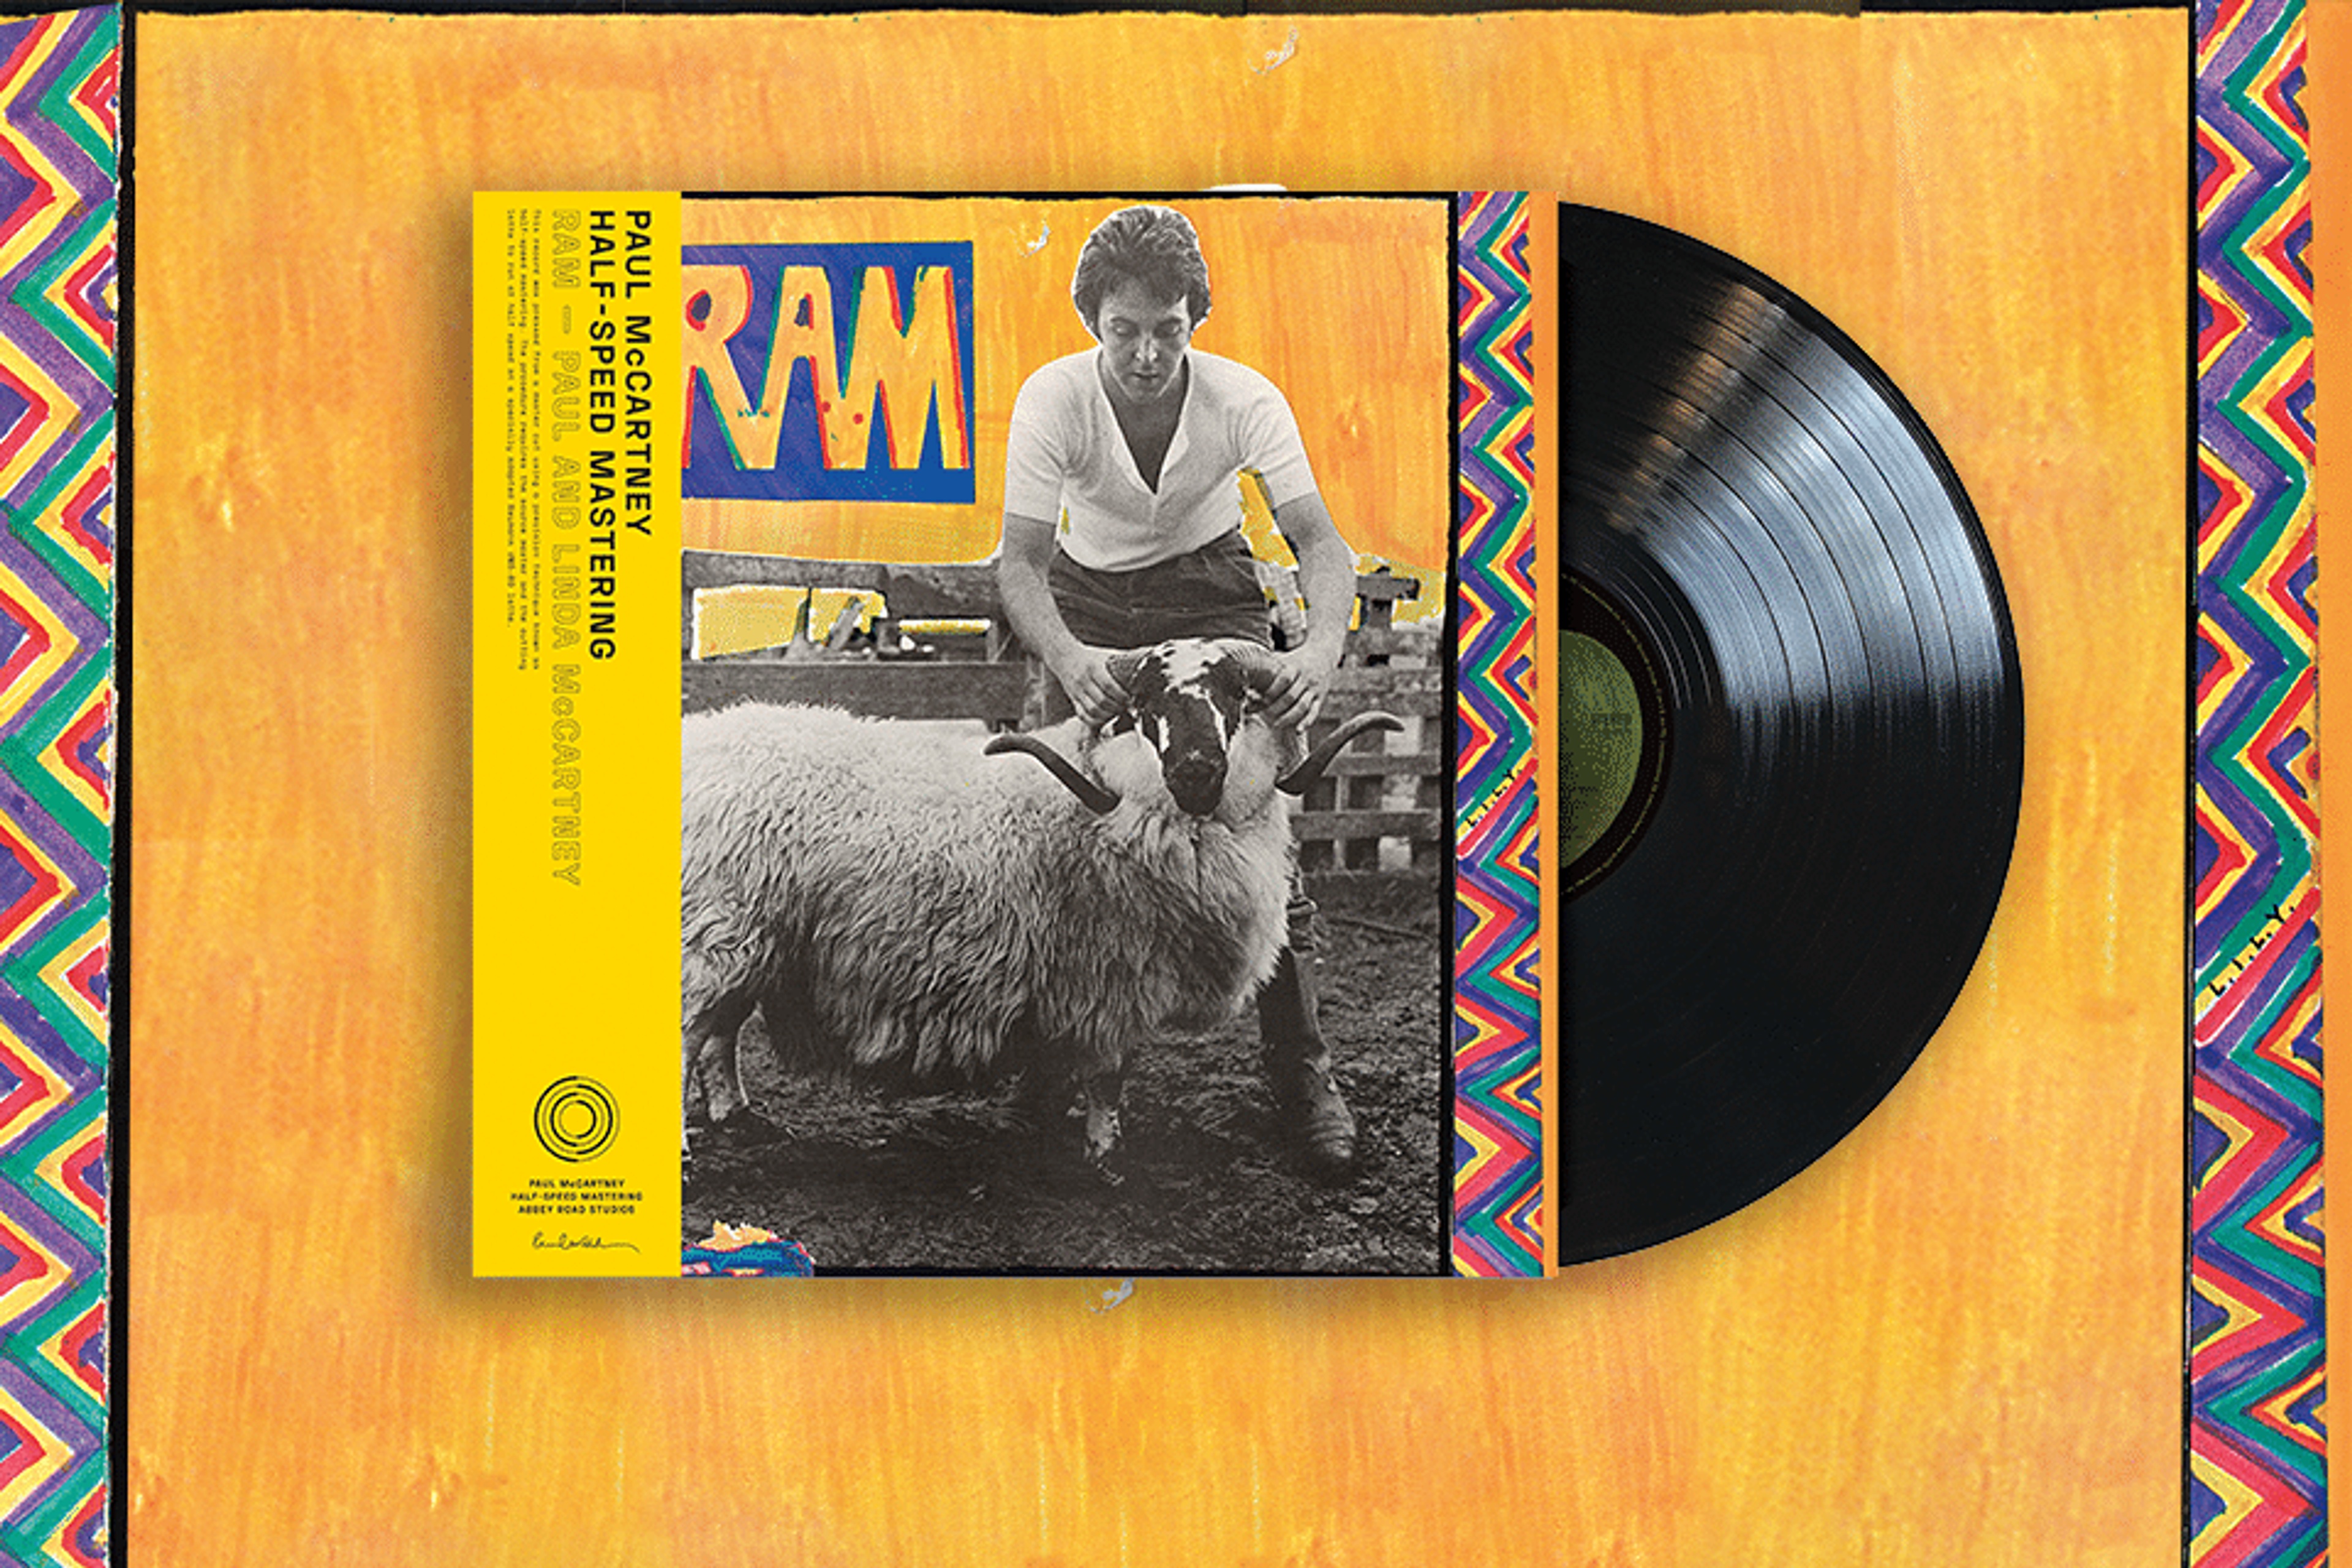 Cover of the 50th Anniversary Half-Speed Mastering release of 'RAM'